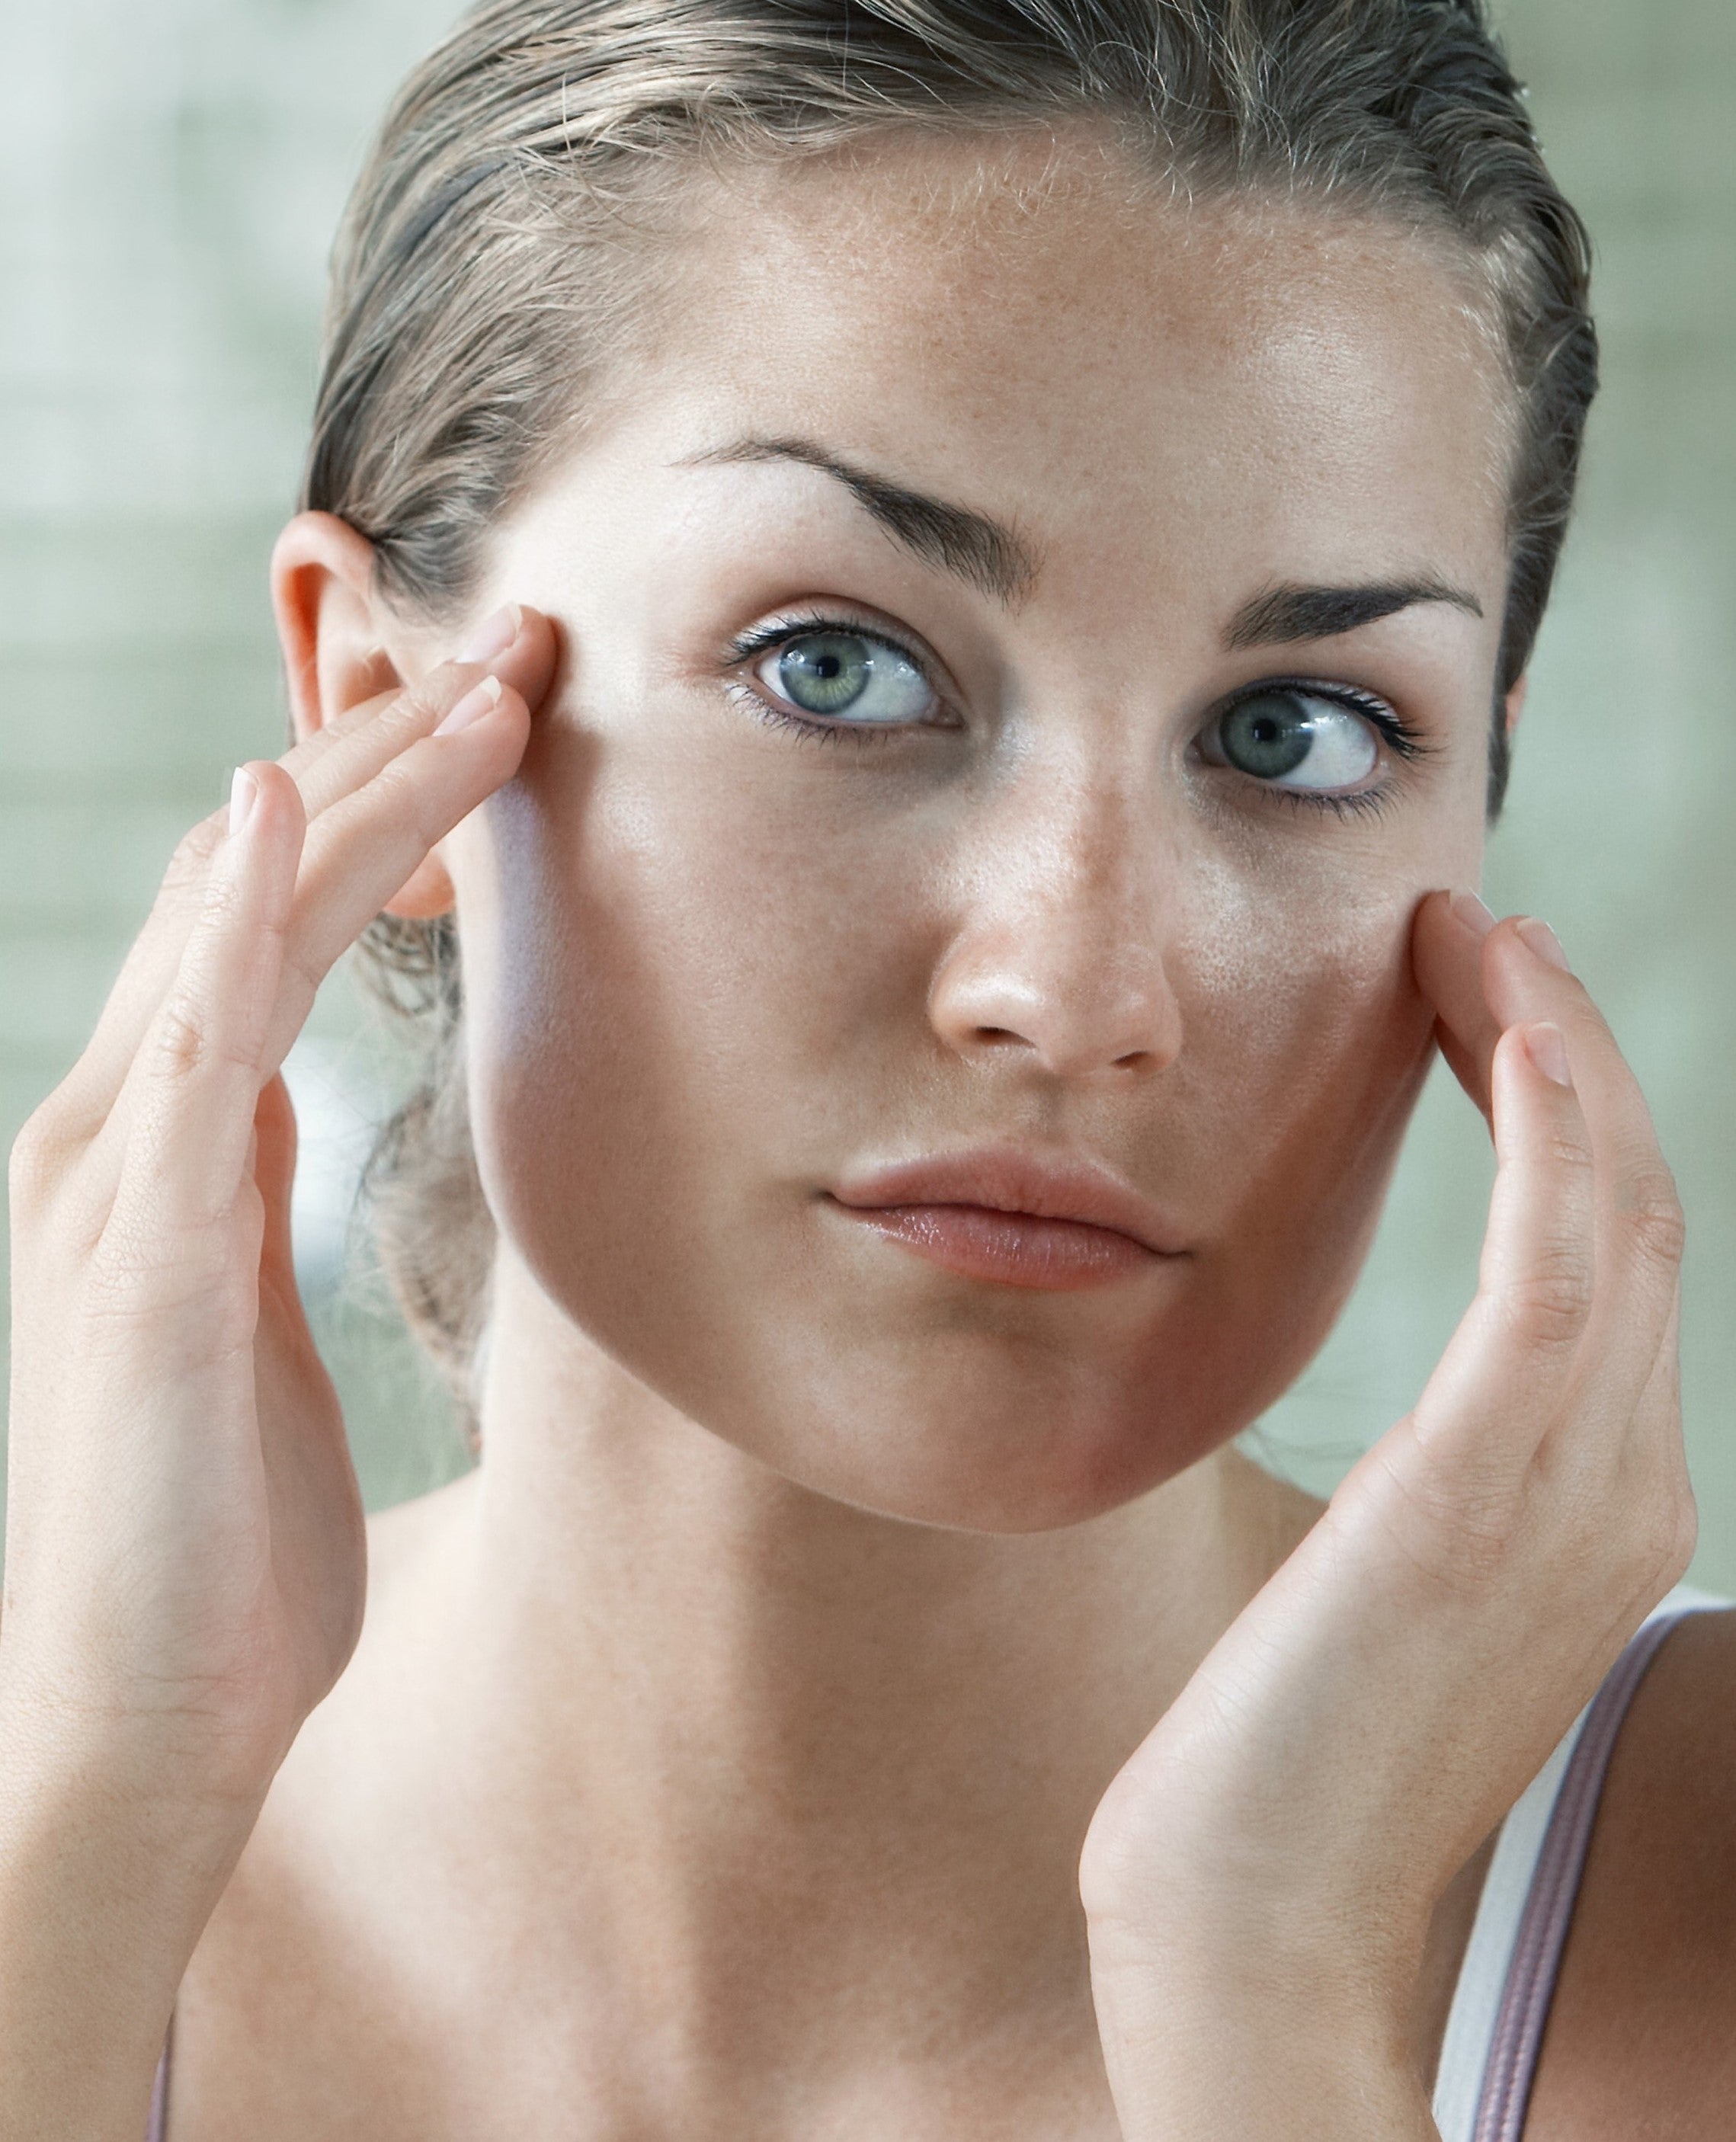 glycolic acid skin care products and how to tell if they are working